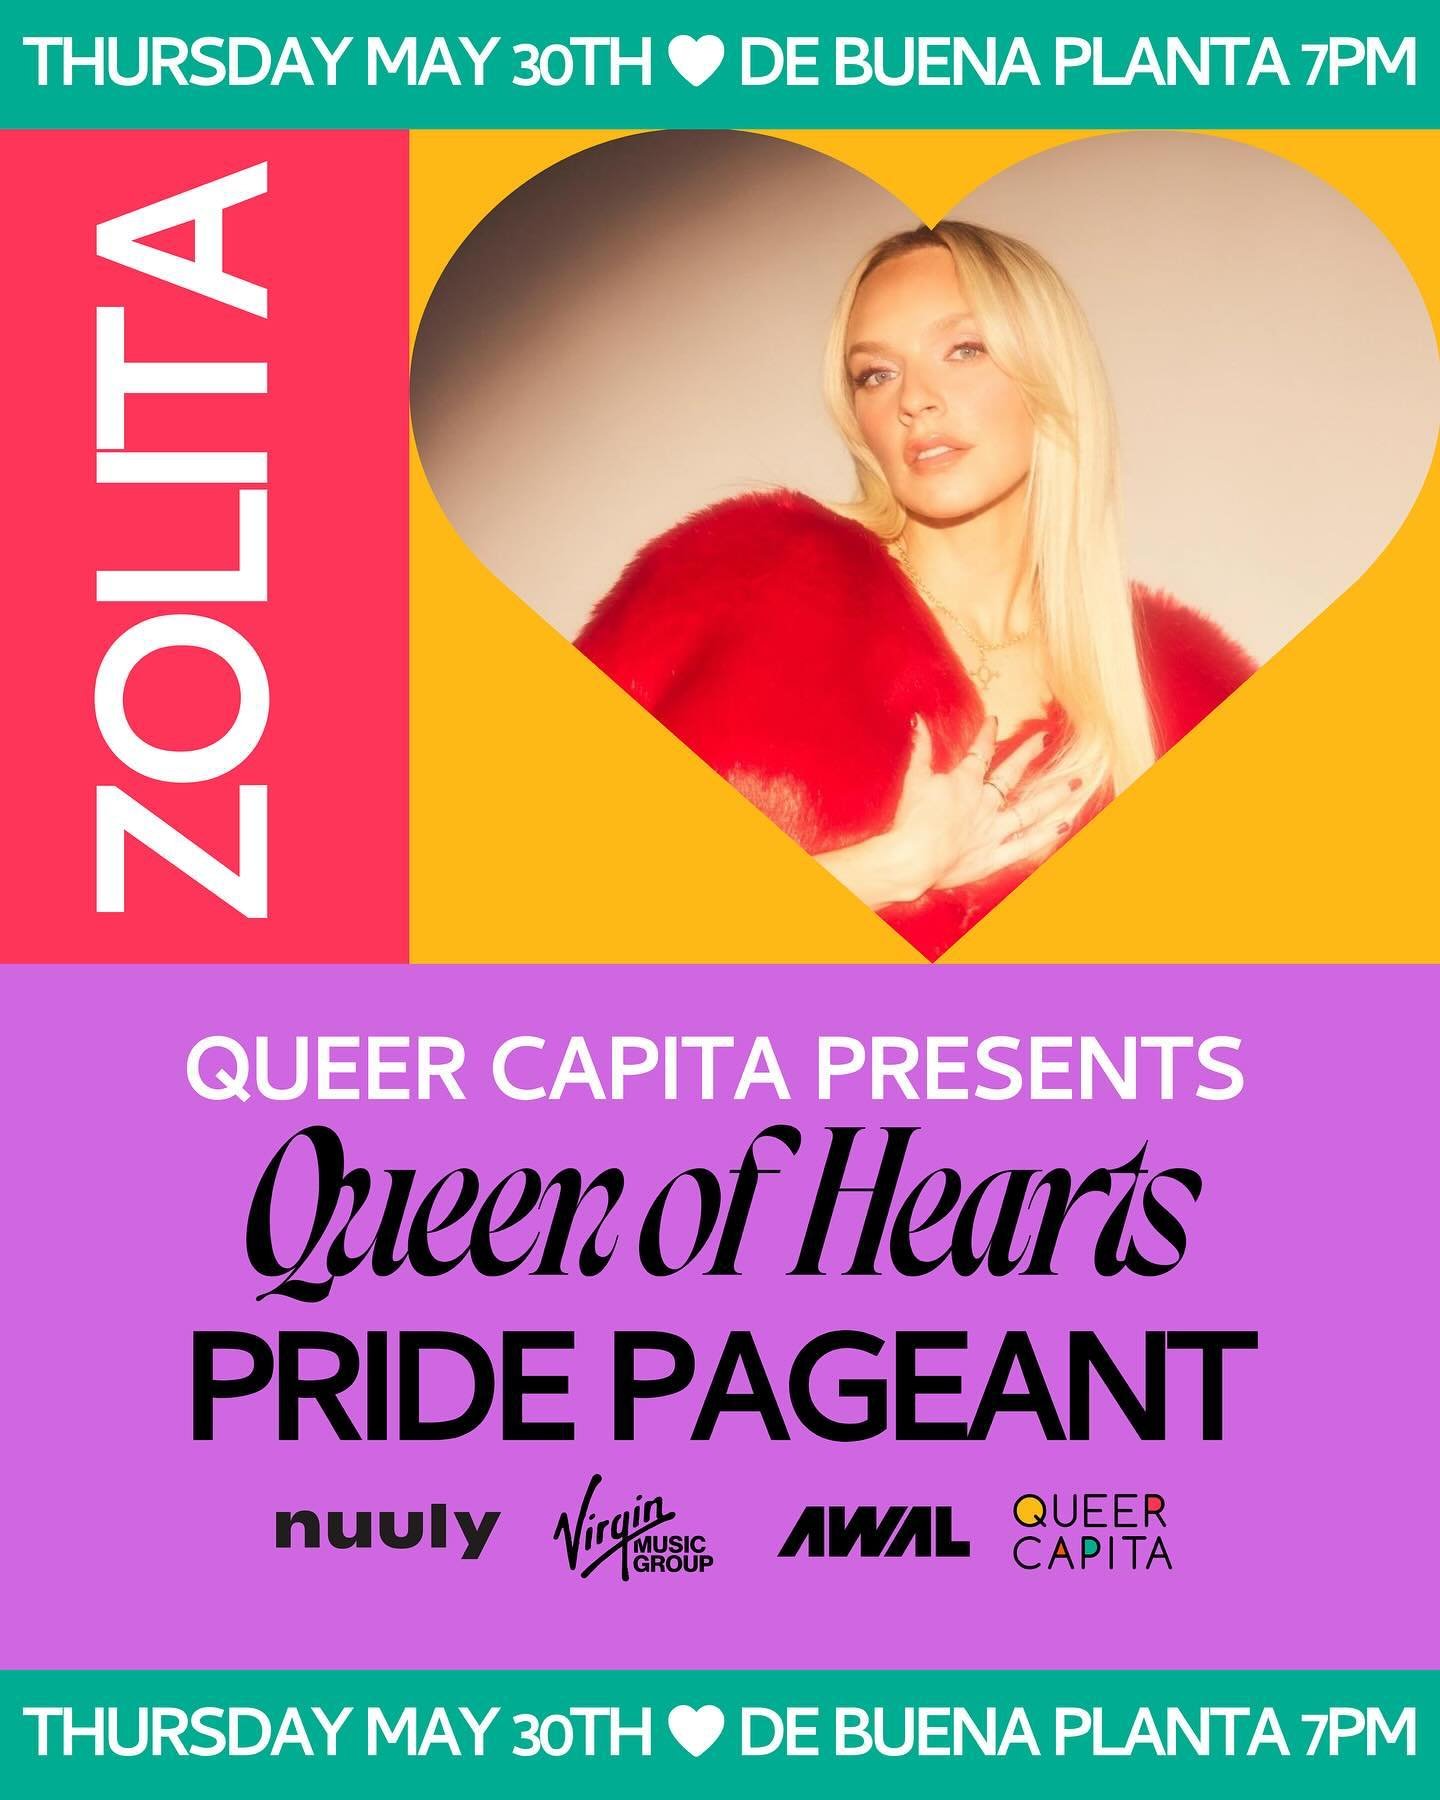 We&rsquo;re excited to announce @Zolita&rsquo;s Queen of Hearts Pride Pageant. Join us on May 30th in Los Angeles to celebrate Zolita&rsquo;s album release with a community of local LGBTQ+ pageant queens. 💖 

RSVP now for the event brought to you in